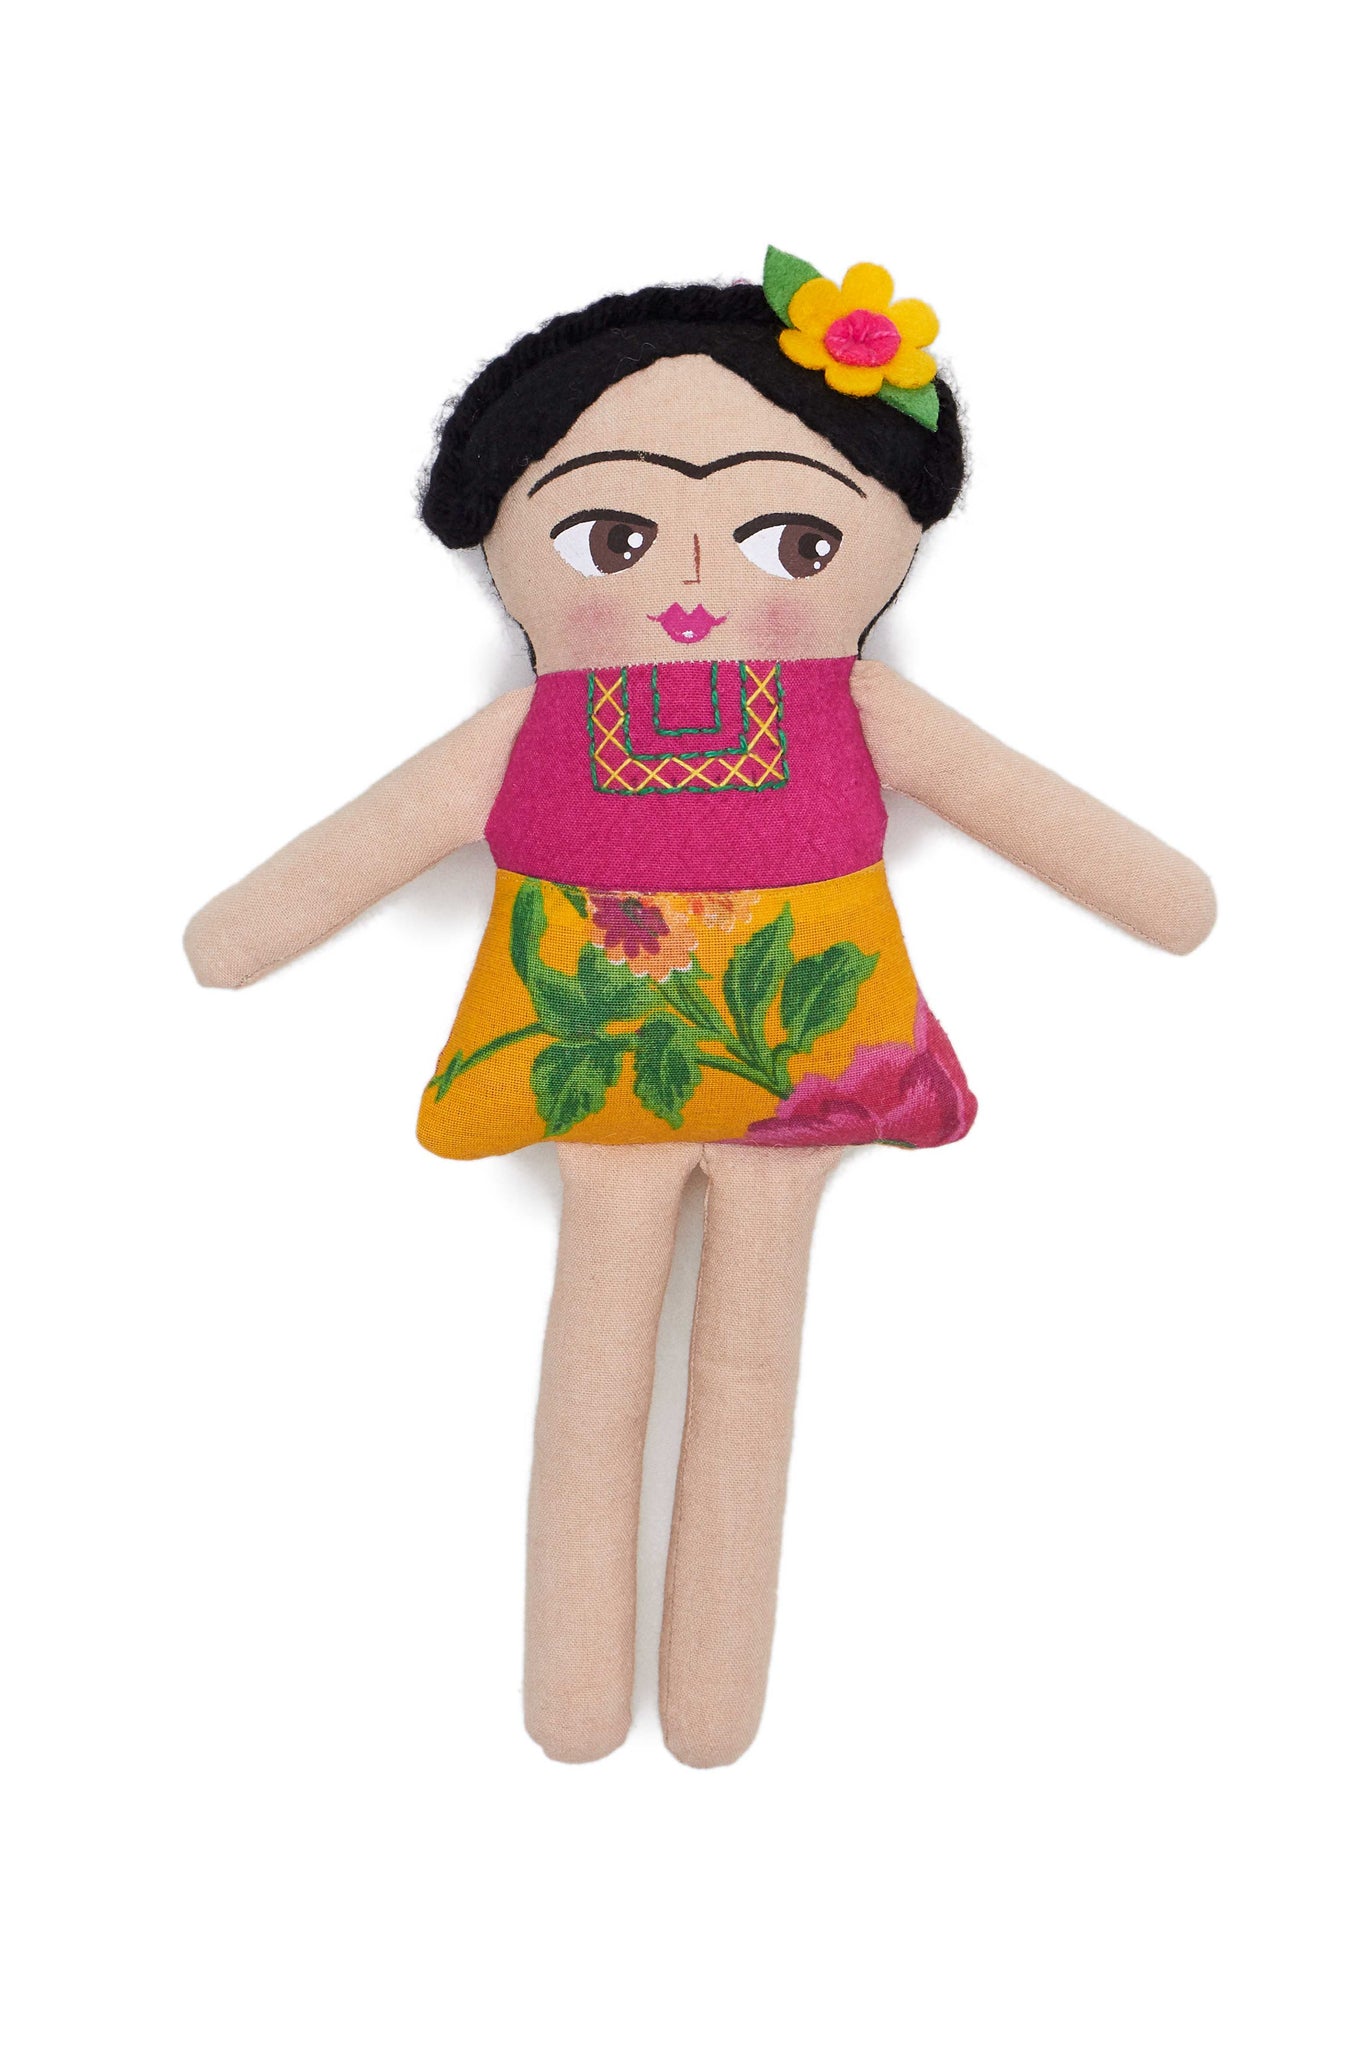 Handmade Frida Doll by Nativa. Handcrafted in Mexico. Hand painted Frida Khalo cotton plush doll. 100% cotton. Spot clean only. Embroidery design and color placement may vary due to the handmade nature of each piece. Color multi. 100% cotton.